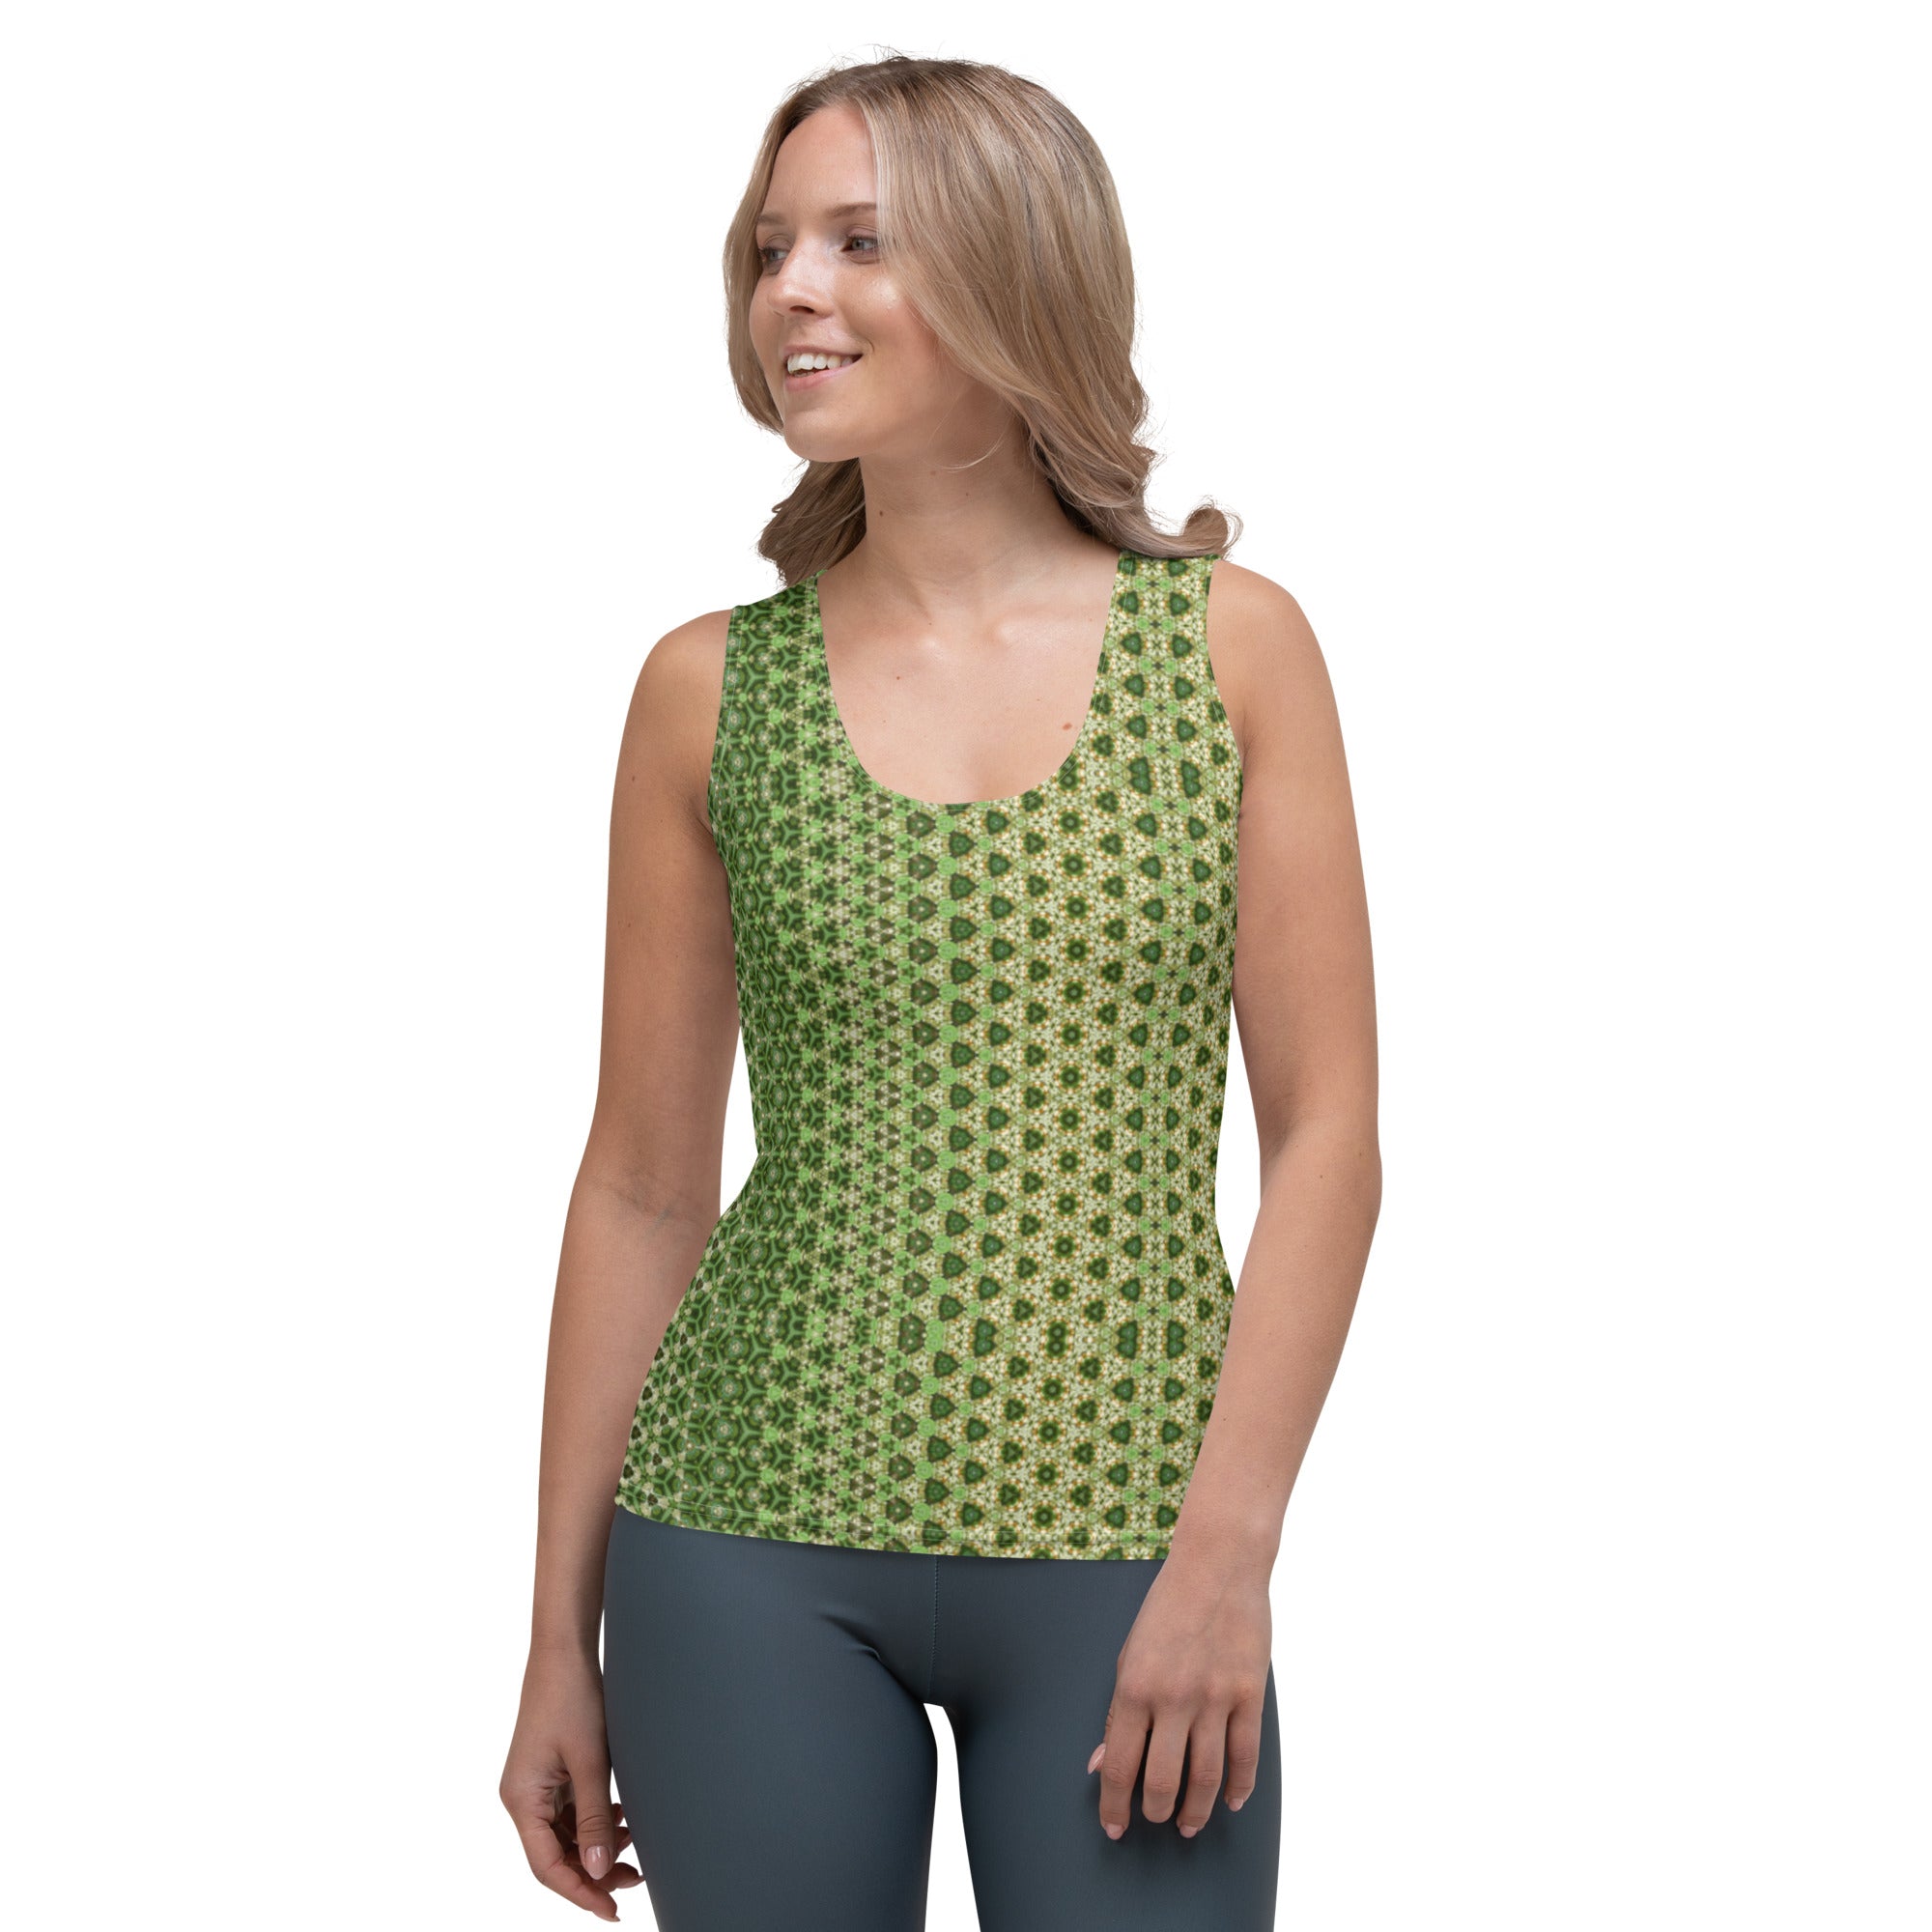 Scarabee Green Pyramid patterned Sublimation Cut & Sew Tank Top, by Sensus Studio Design